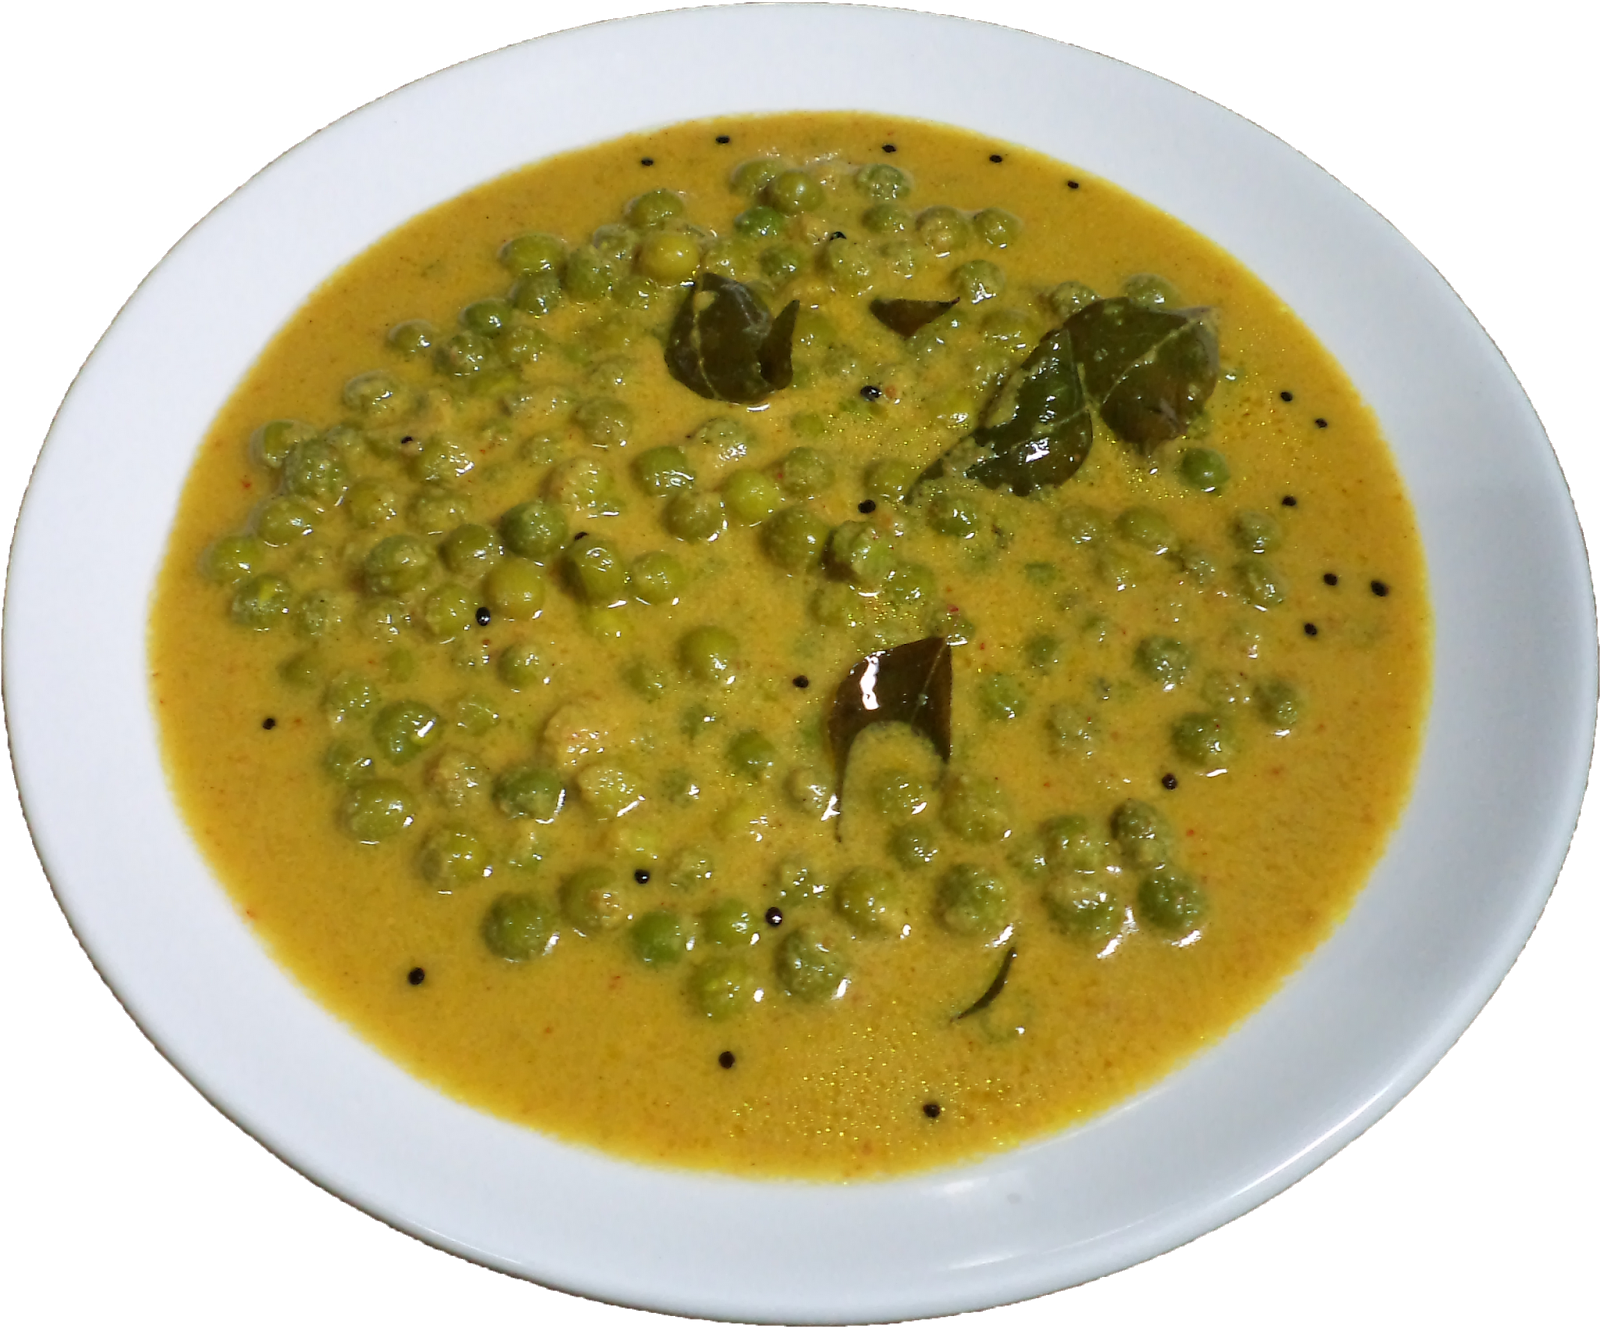 A Bowl Of Soup With Green Peas And Leaves